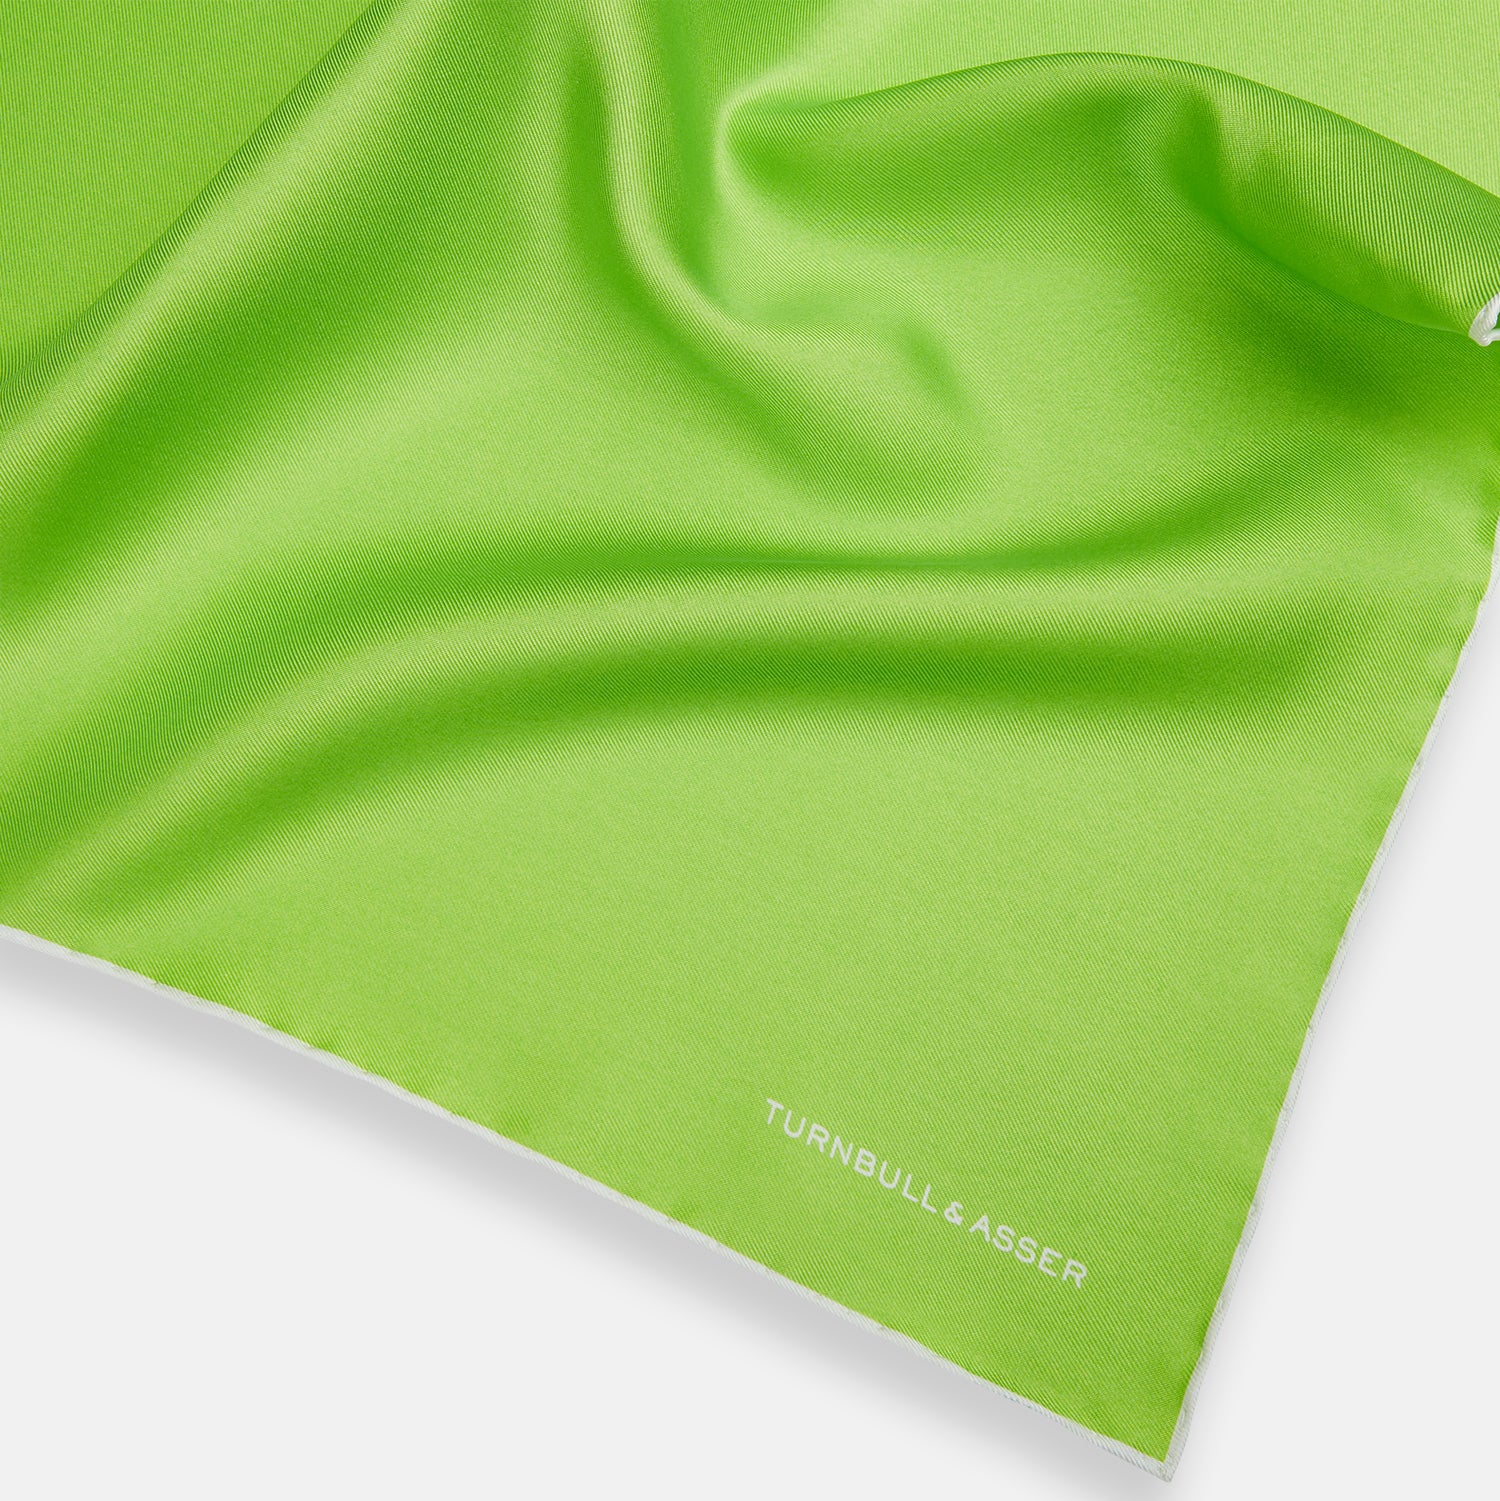 LIME GREEN AND ECRU PIPED SILK POCKET SQUARE